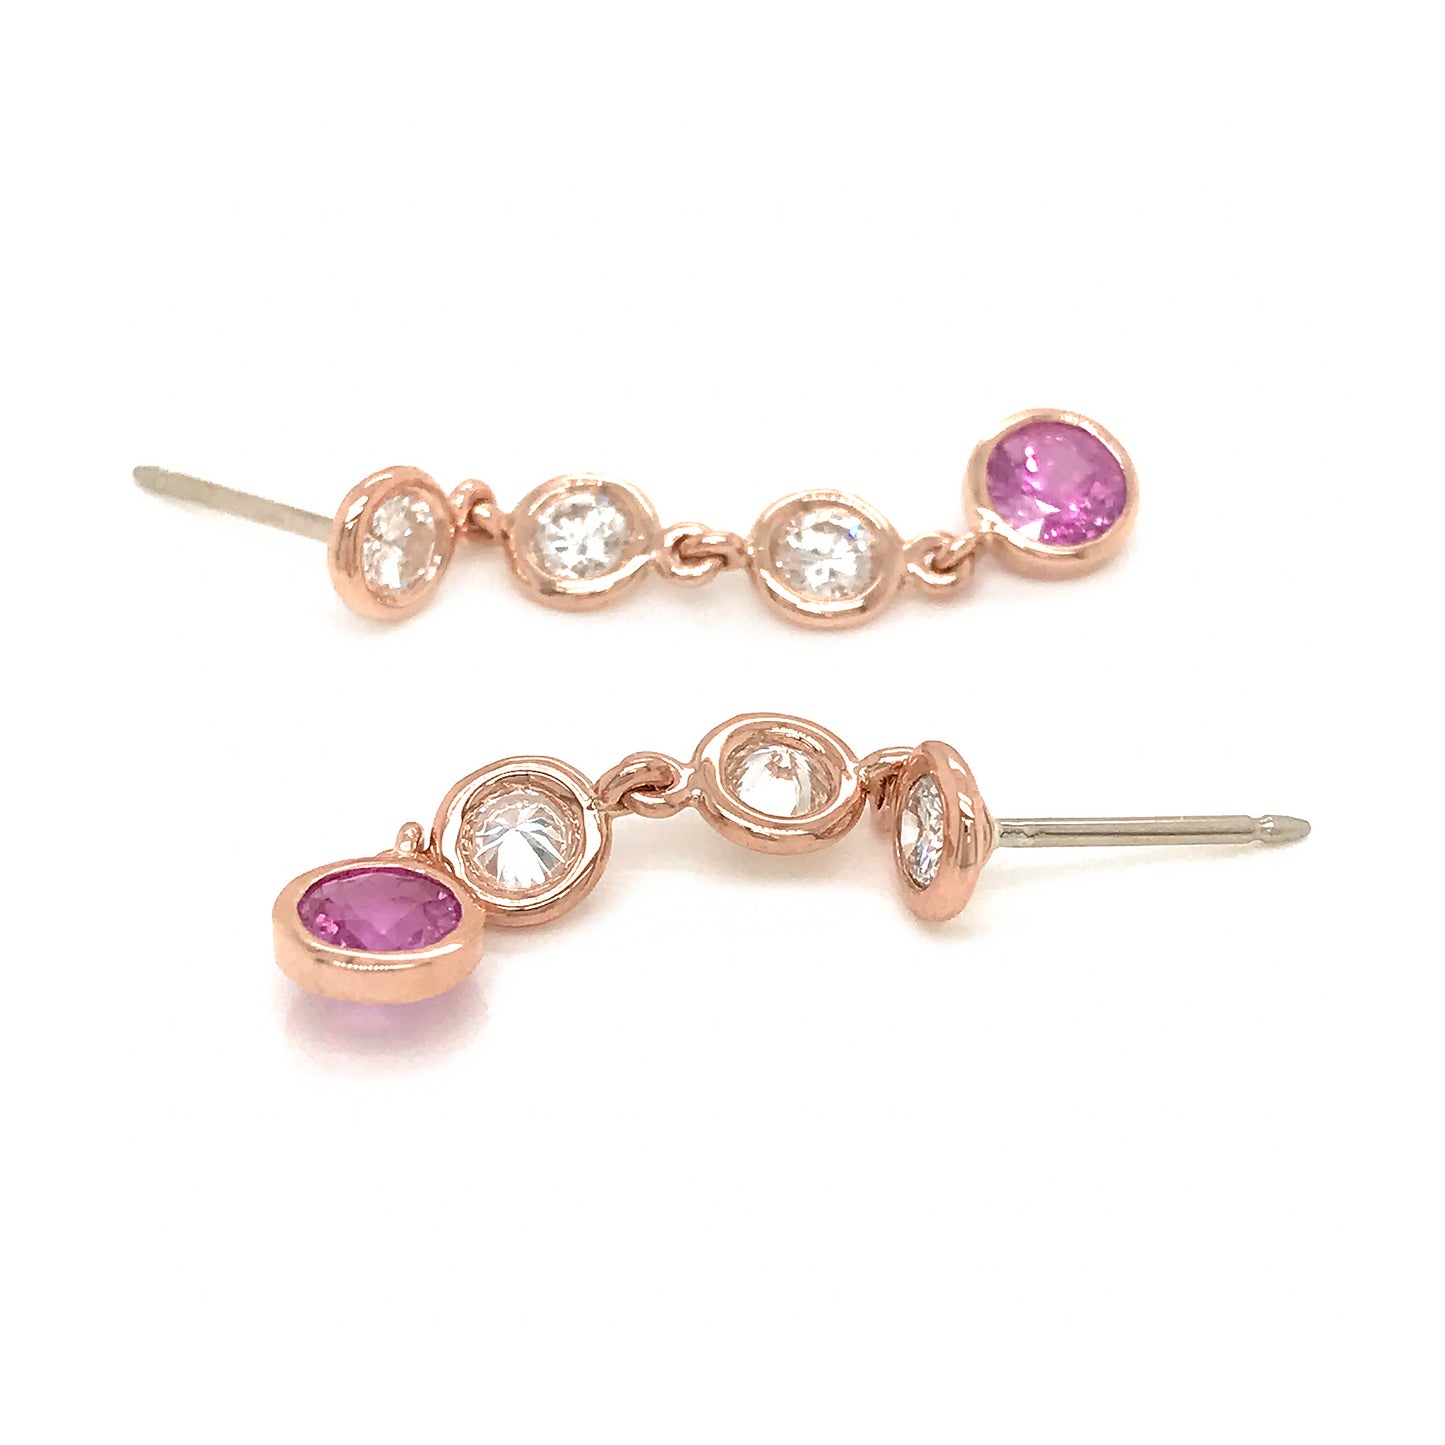 Load image into Gallery viewer, FAB DROPS 14k Pink Gold Bezel Set Diamond and Pink Sapphire Drop Earrings
